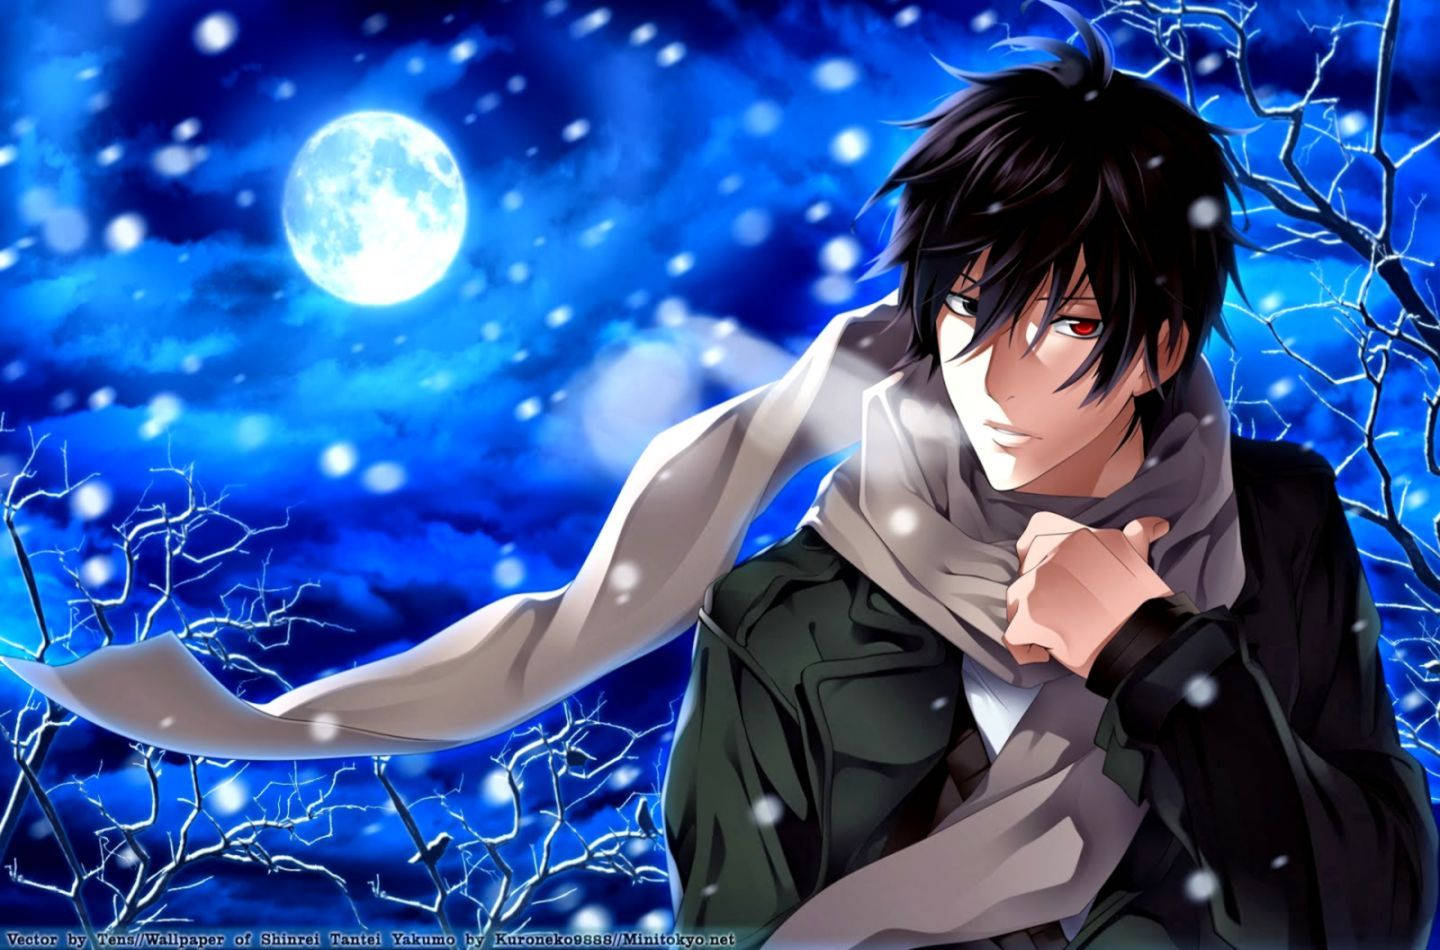 A lonely winter night in the snow, with a melancholy Anime Boy Wallpaper